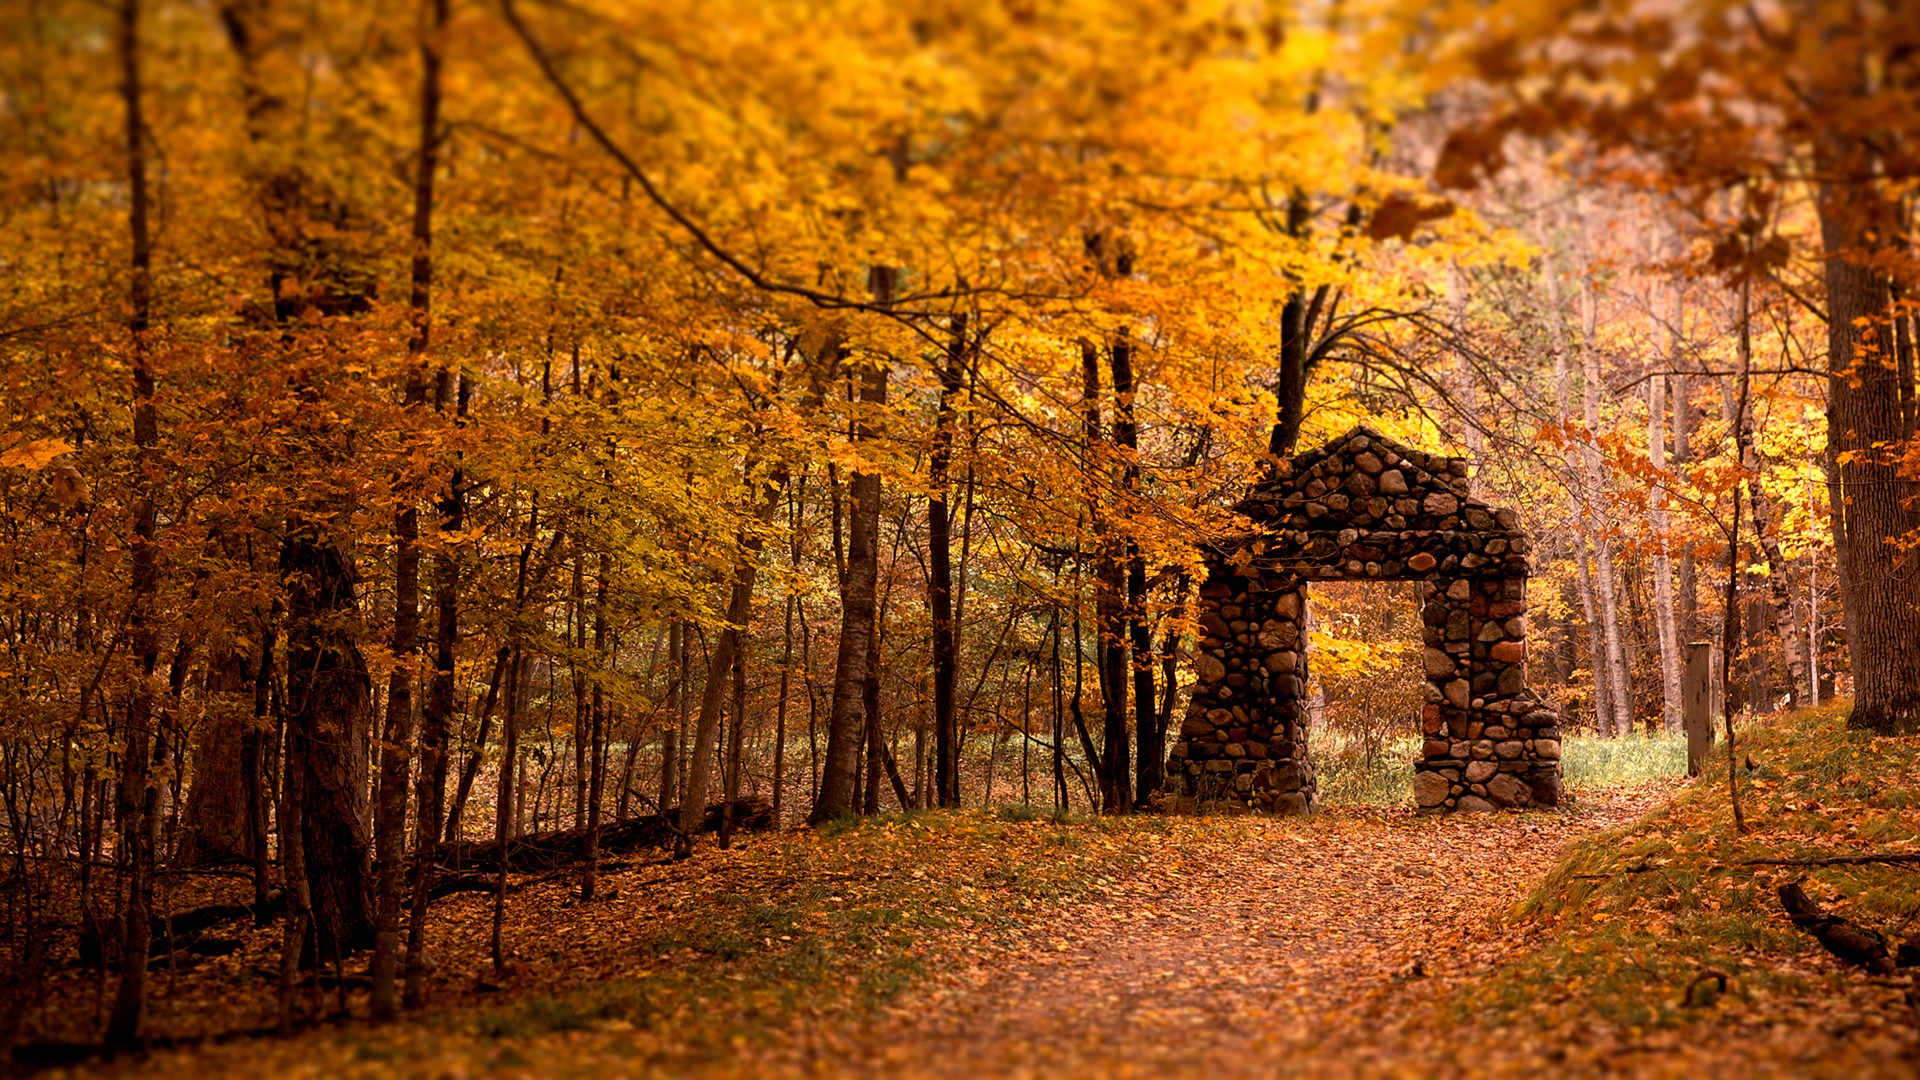 General 1920x1080 fall nature trees leaves ruins outdoors plants